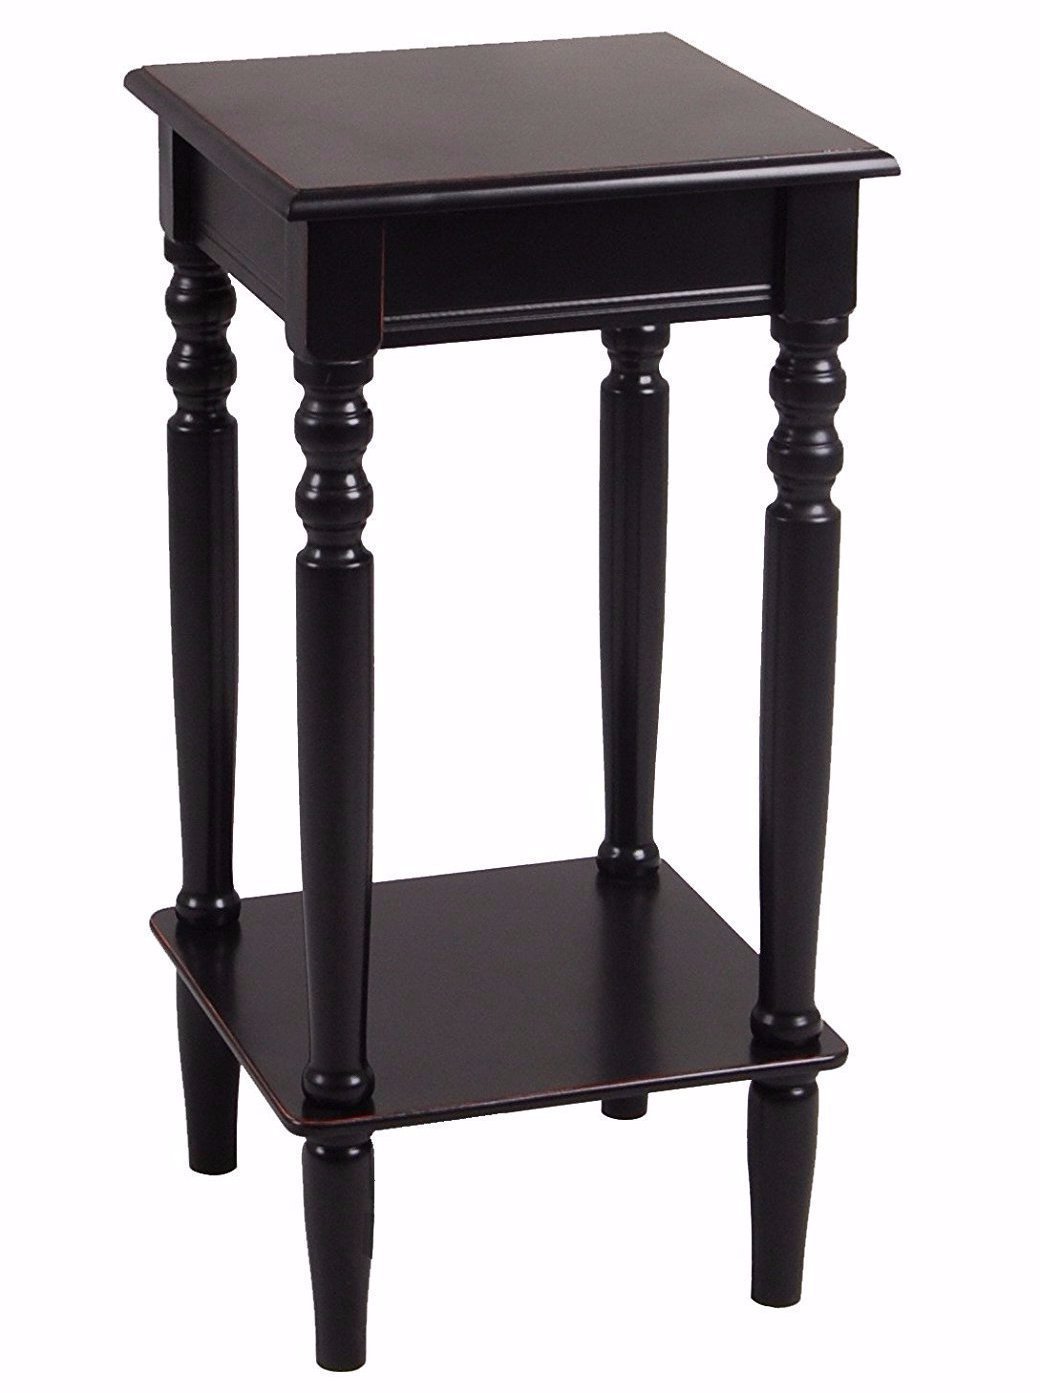 accent side table square antique black urbanest end tables mansfield leather sofa dining room tures slimline bedside units adjustable lift top coffee lodge style furniture modern